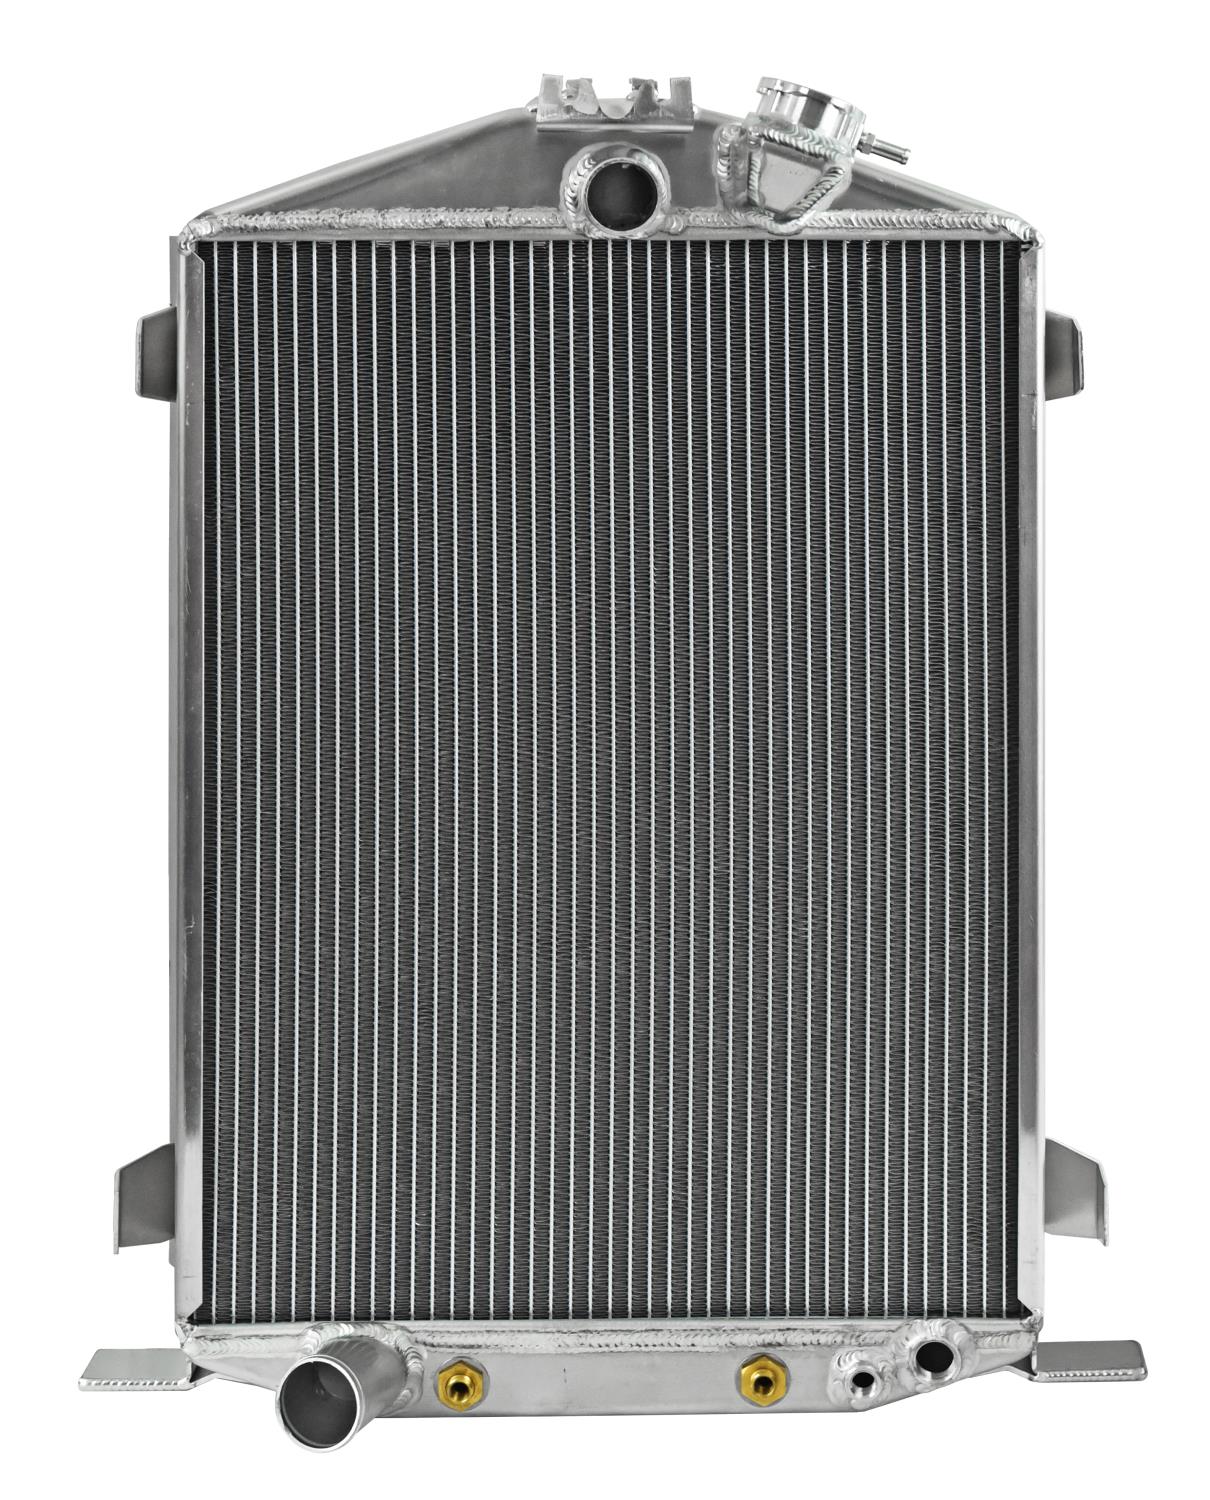 Aluminum Radiator for 1932 Ford HI-BOY with Ford